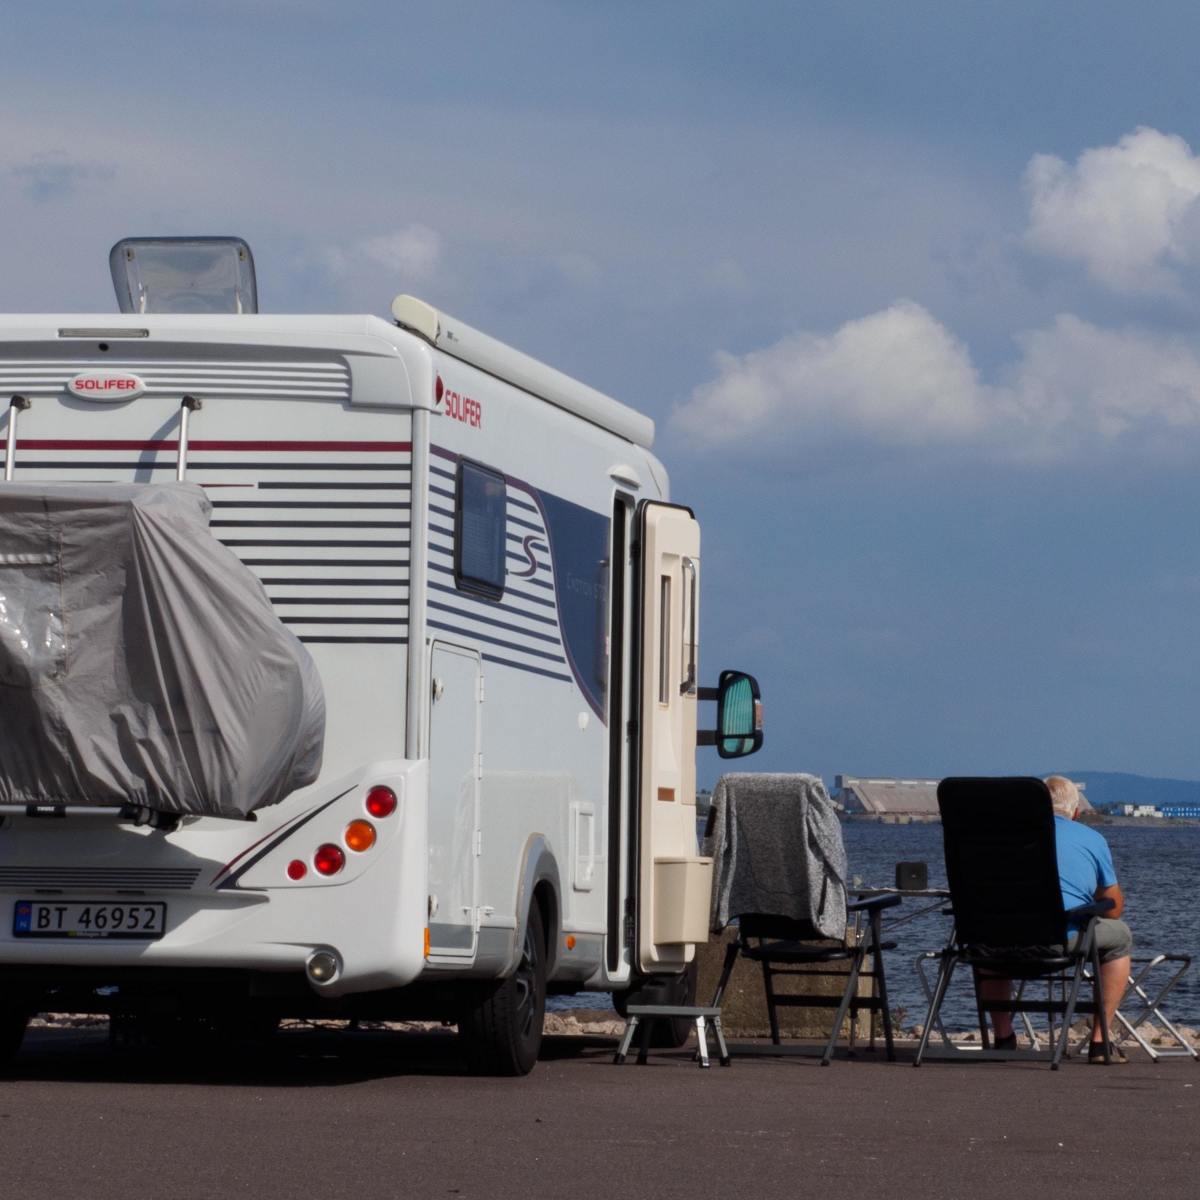 Find out what really happens when people decide to sell everything and move into a recreational vehicle.